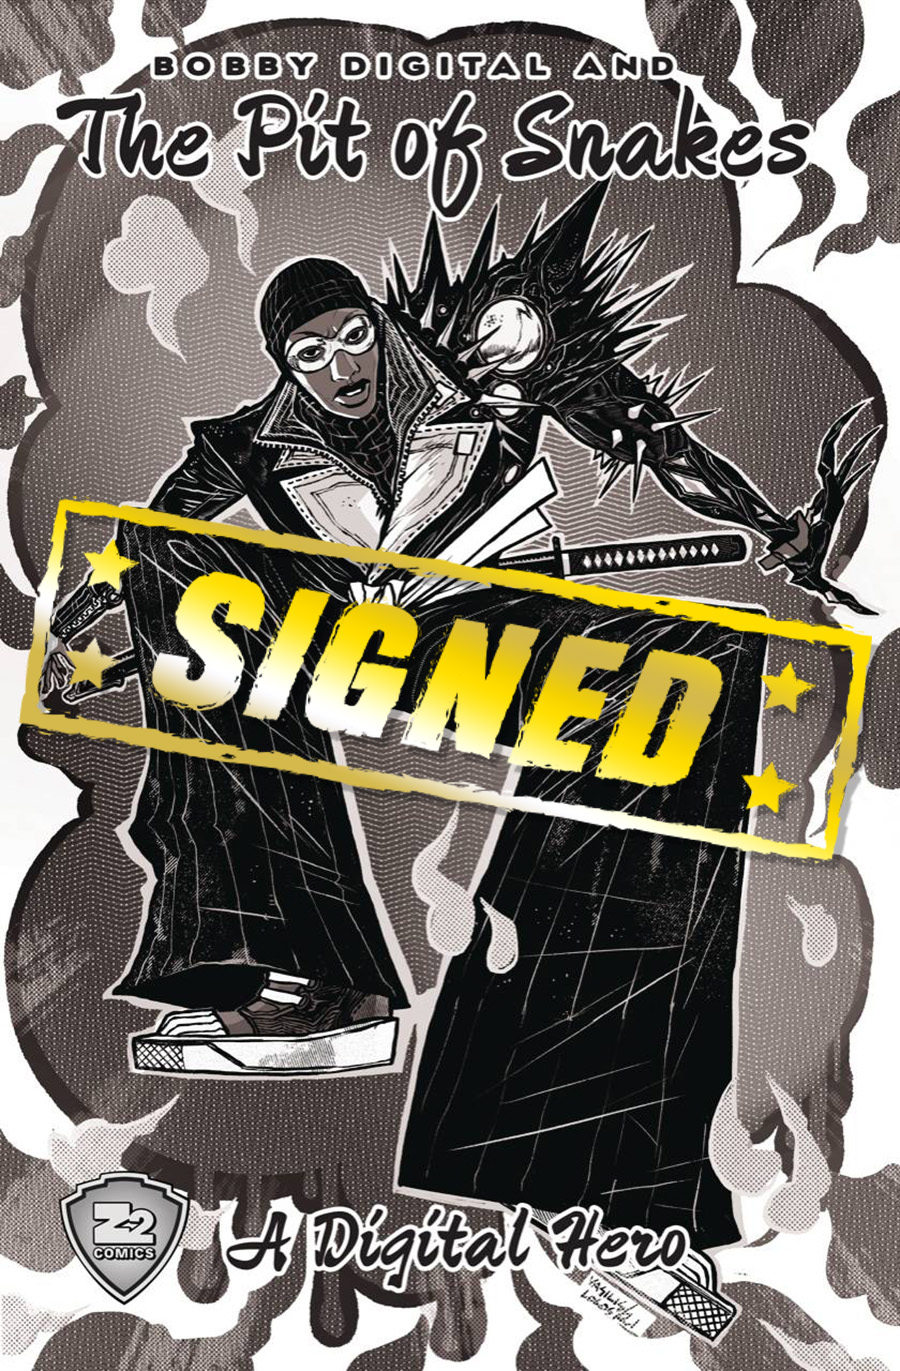 Bobby Digital And The Pit Of Snakes TP Signed By The RZA